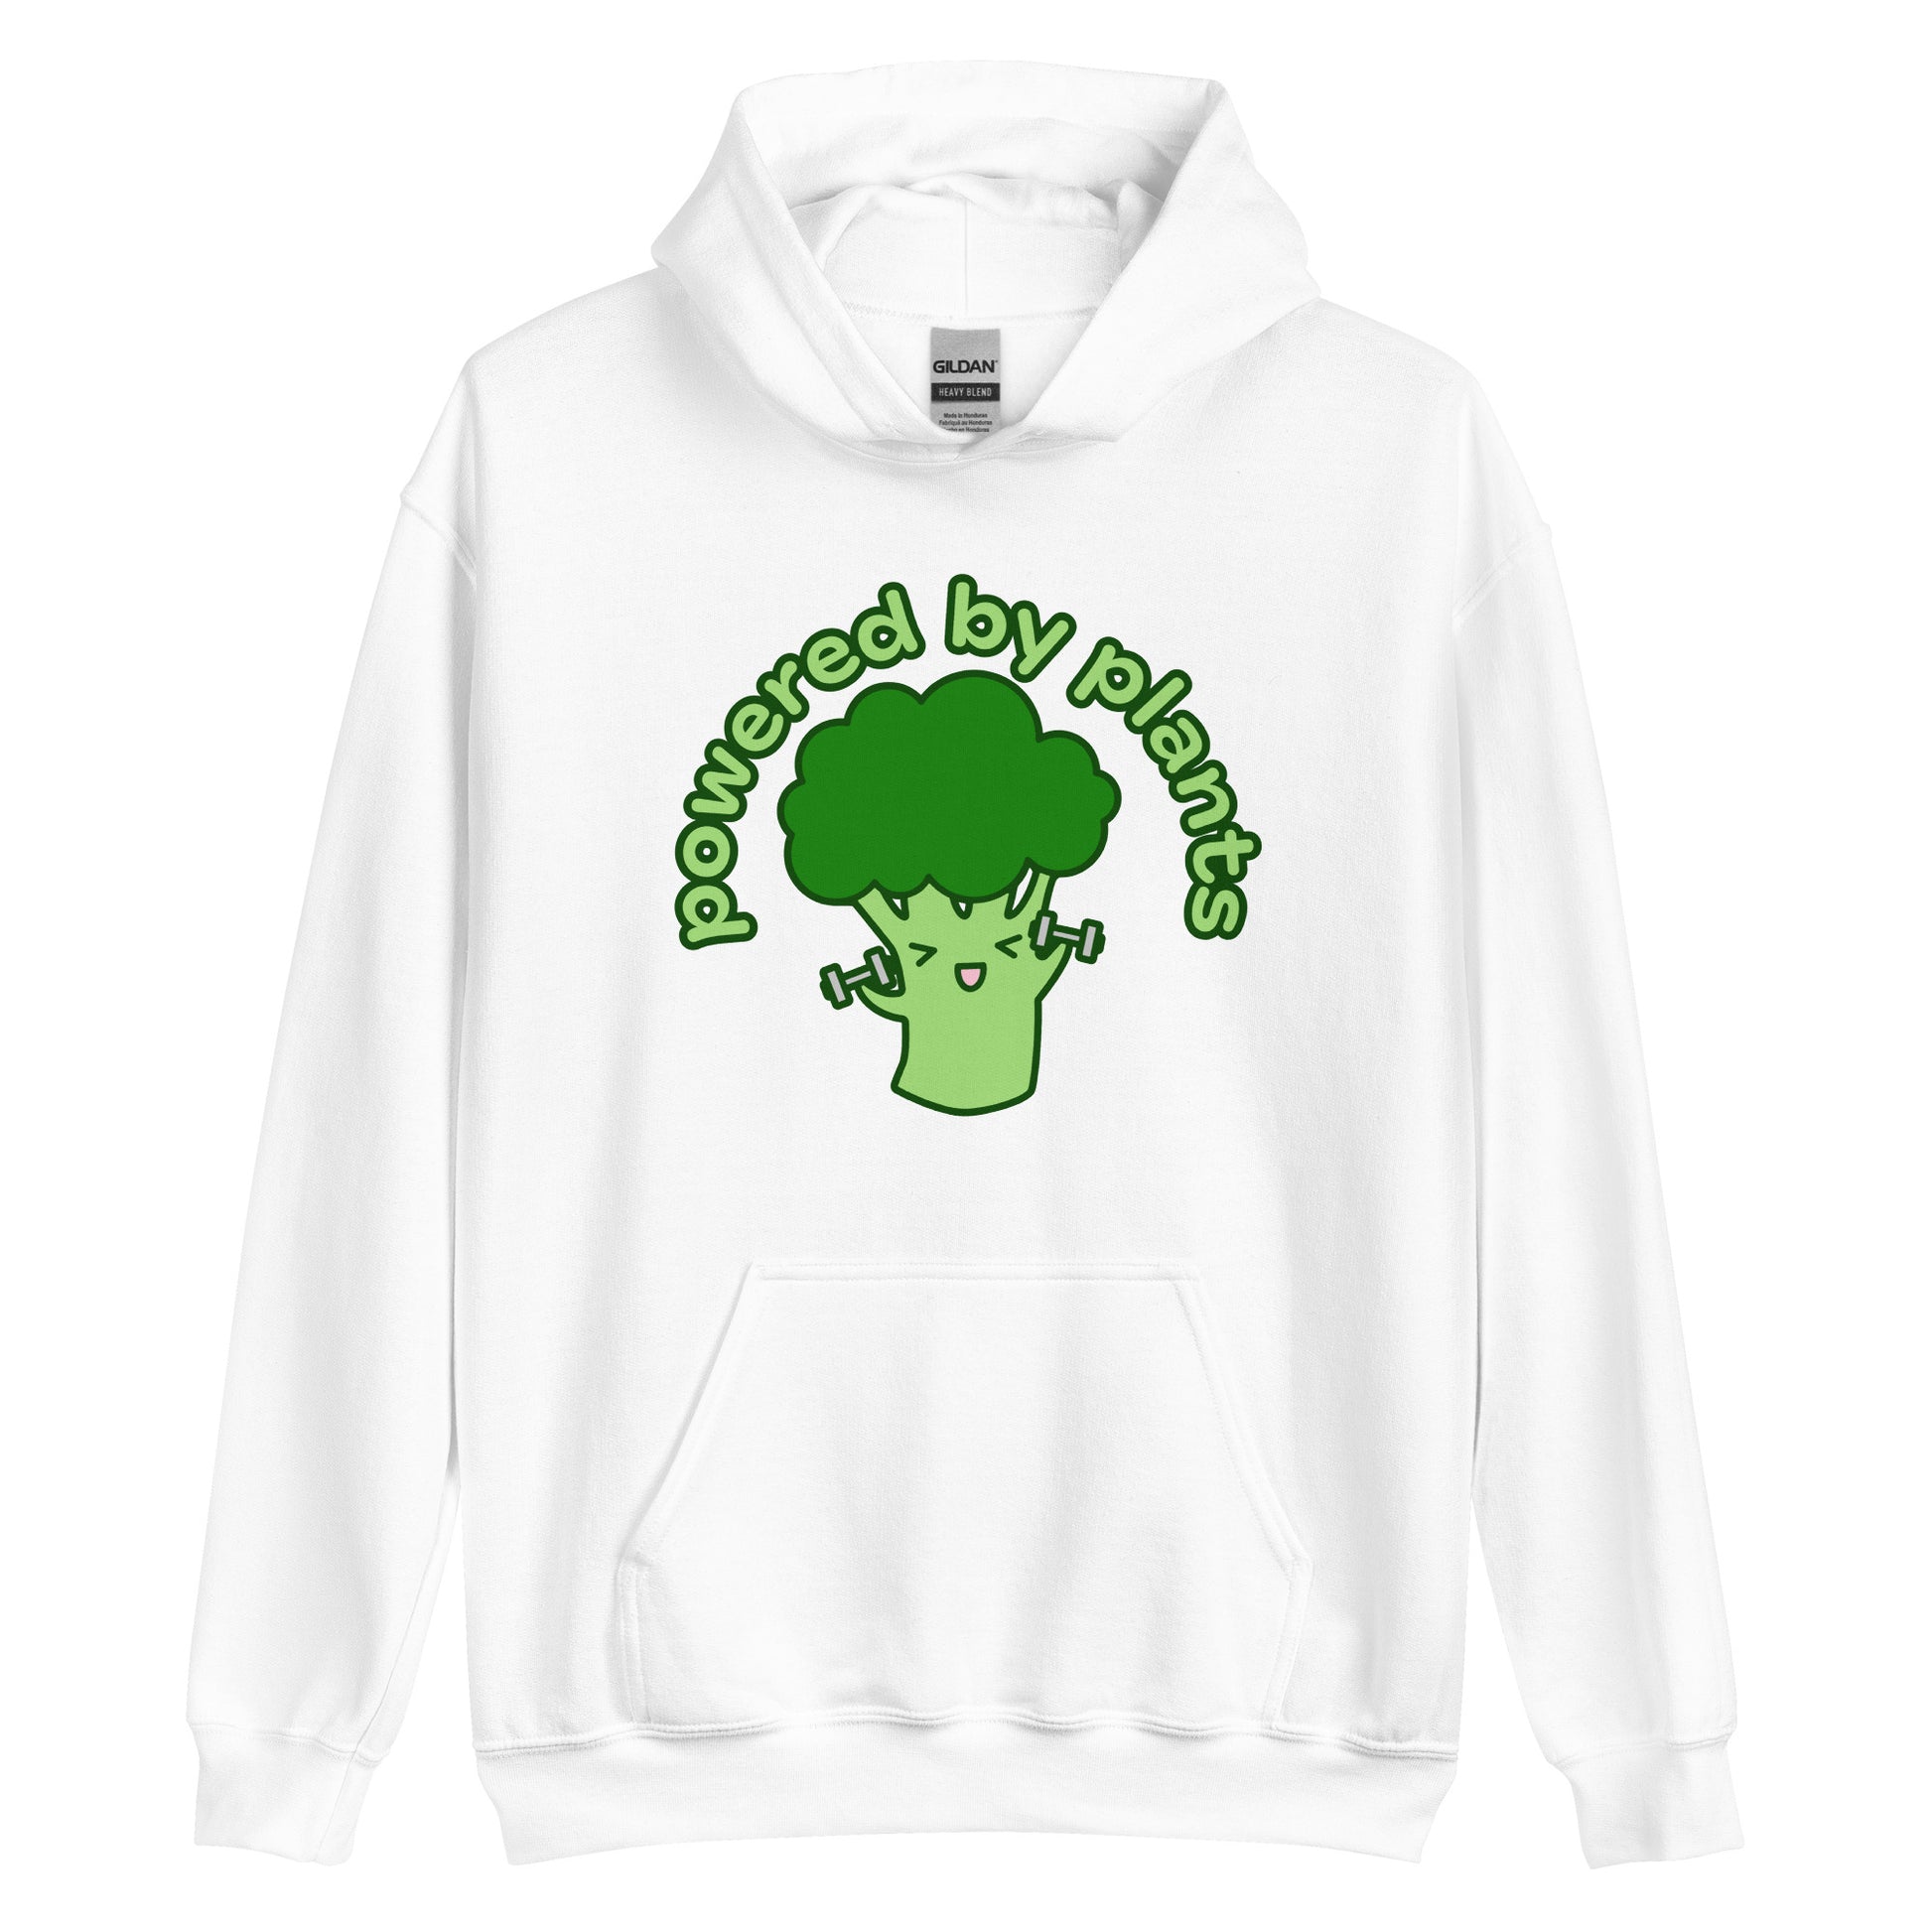 A white hooded sweatshirt featuring an illustration of a cartoon broccoli character. The broccoli is excitedly lifting weights, and text in an arc above the broccoli reads "powered by plants".